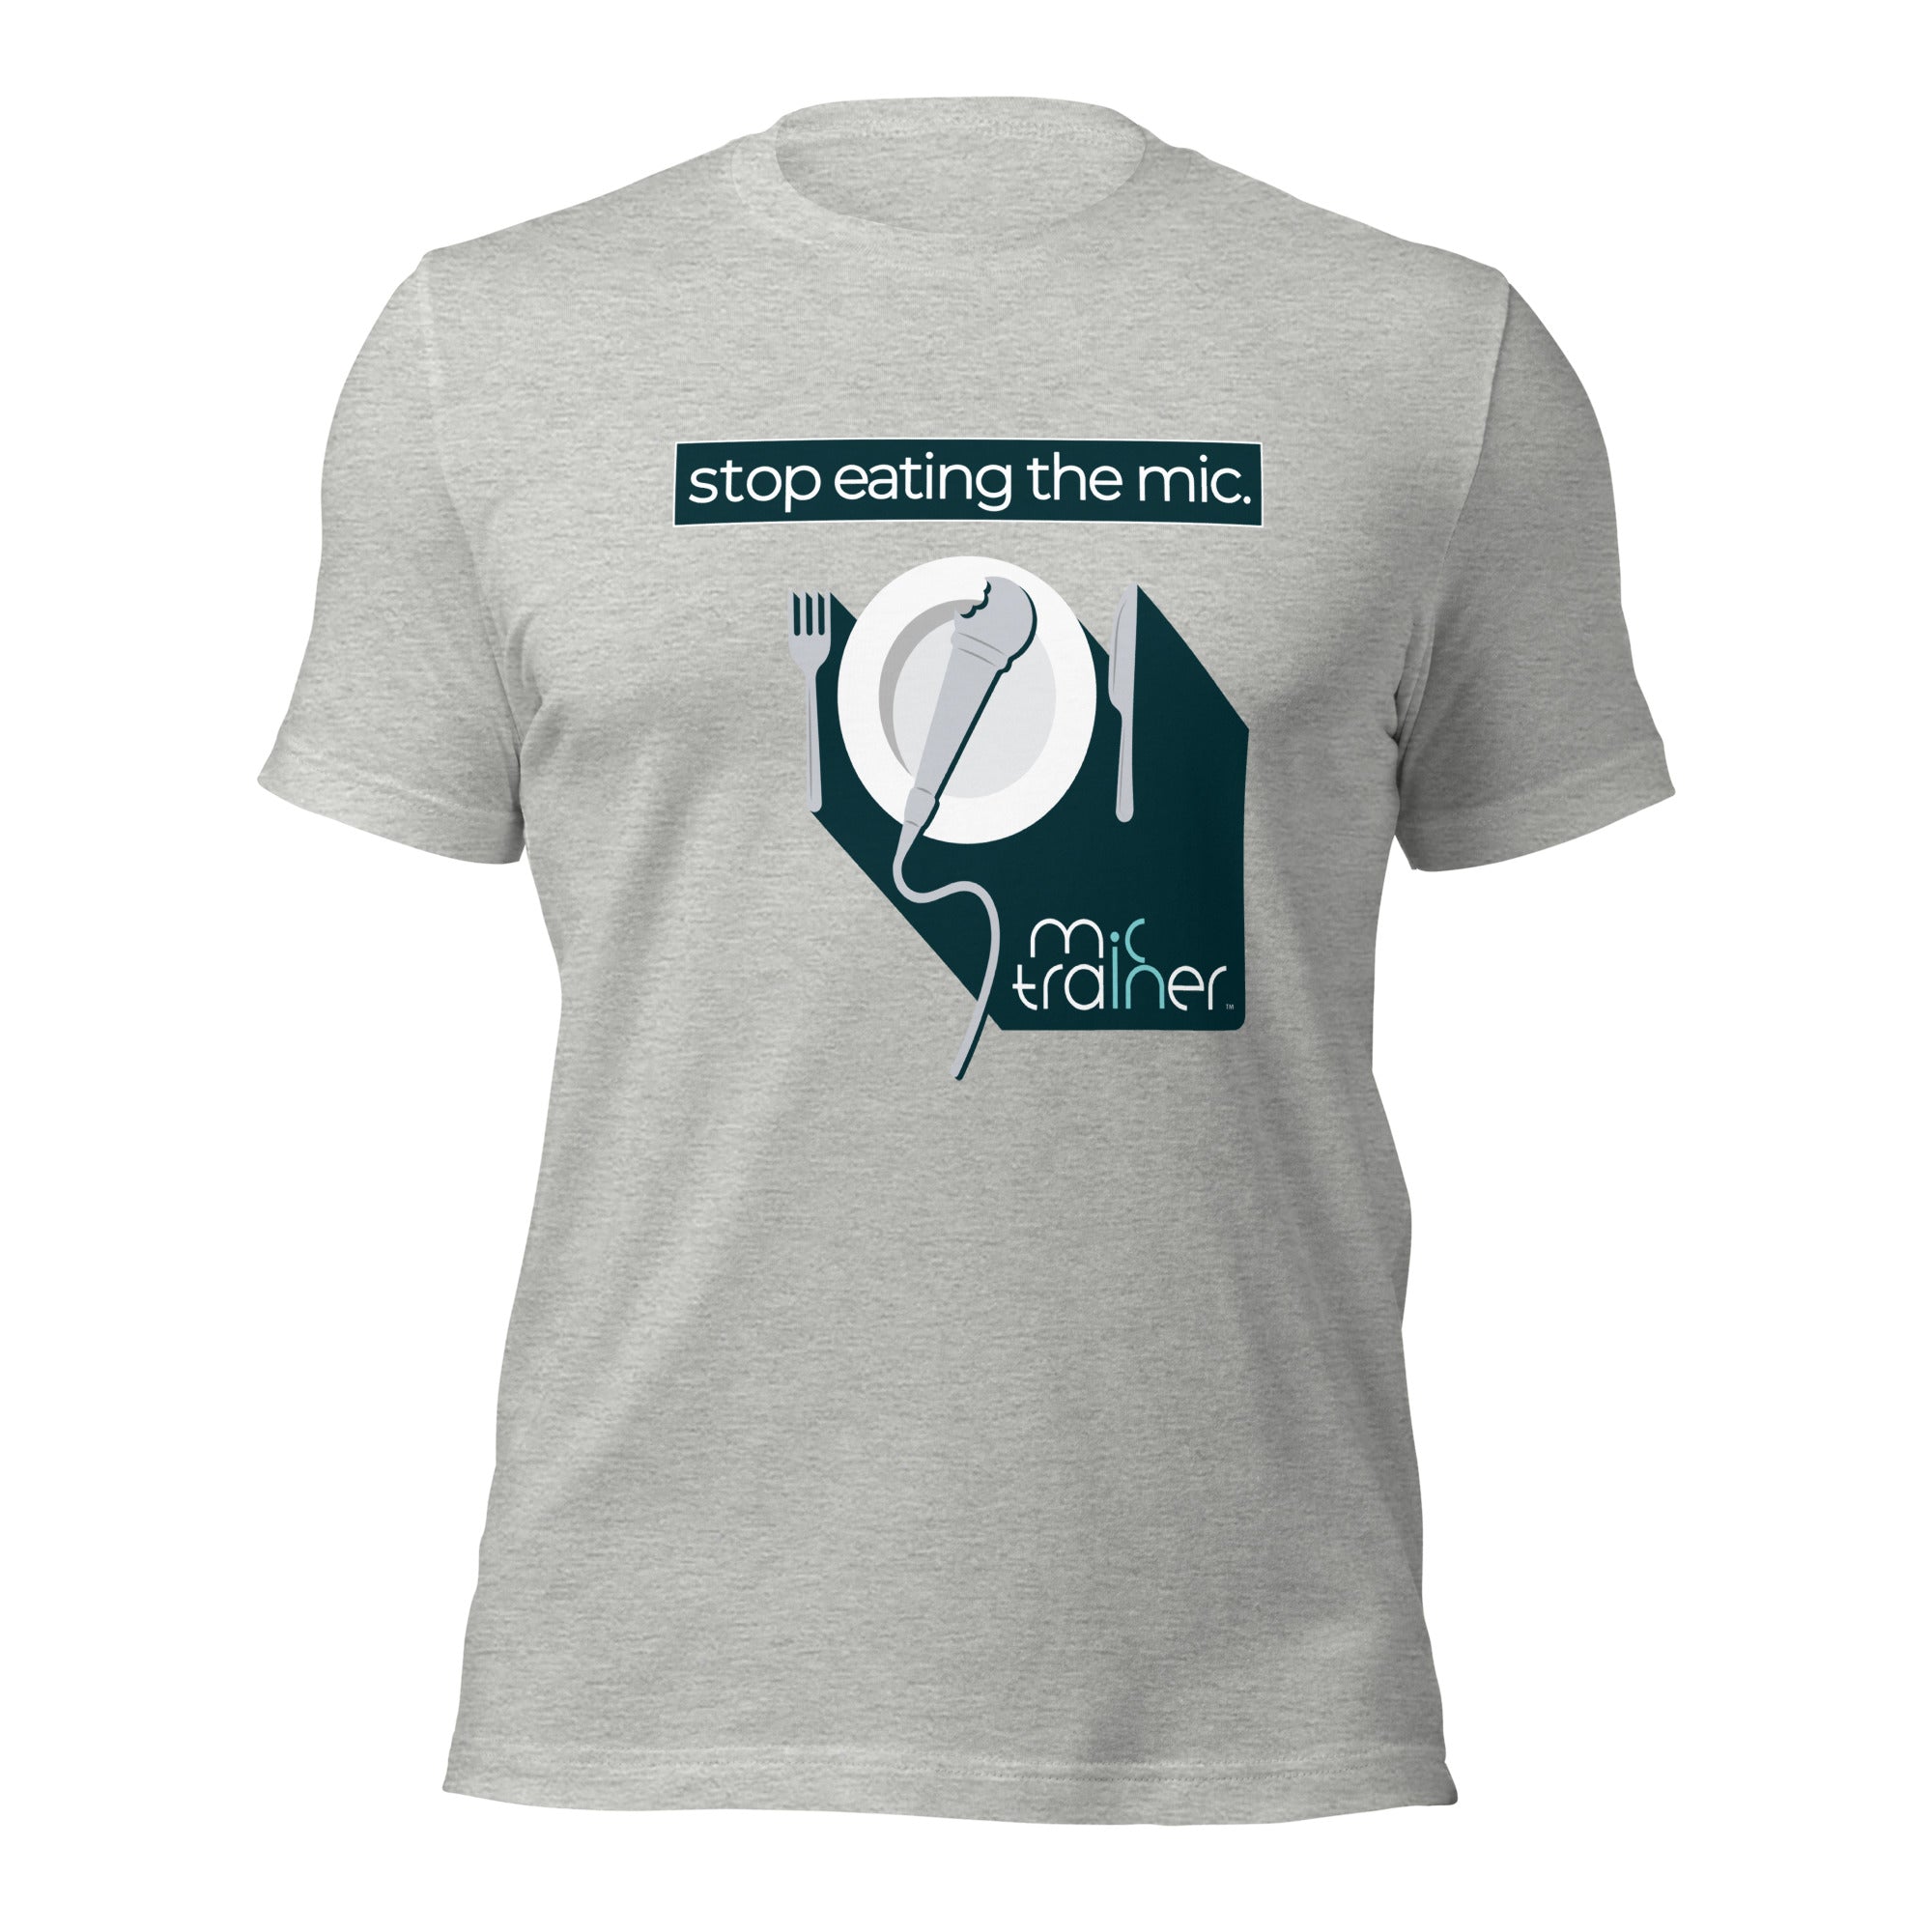 Stop Eating The Mic - Unisex T-Shirt - Mic Trainer